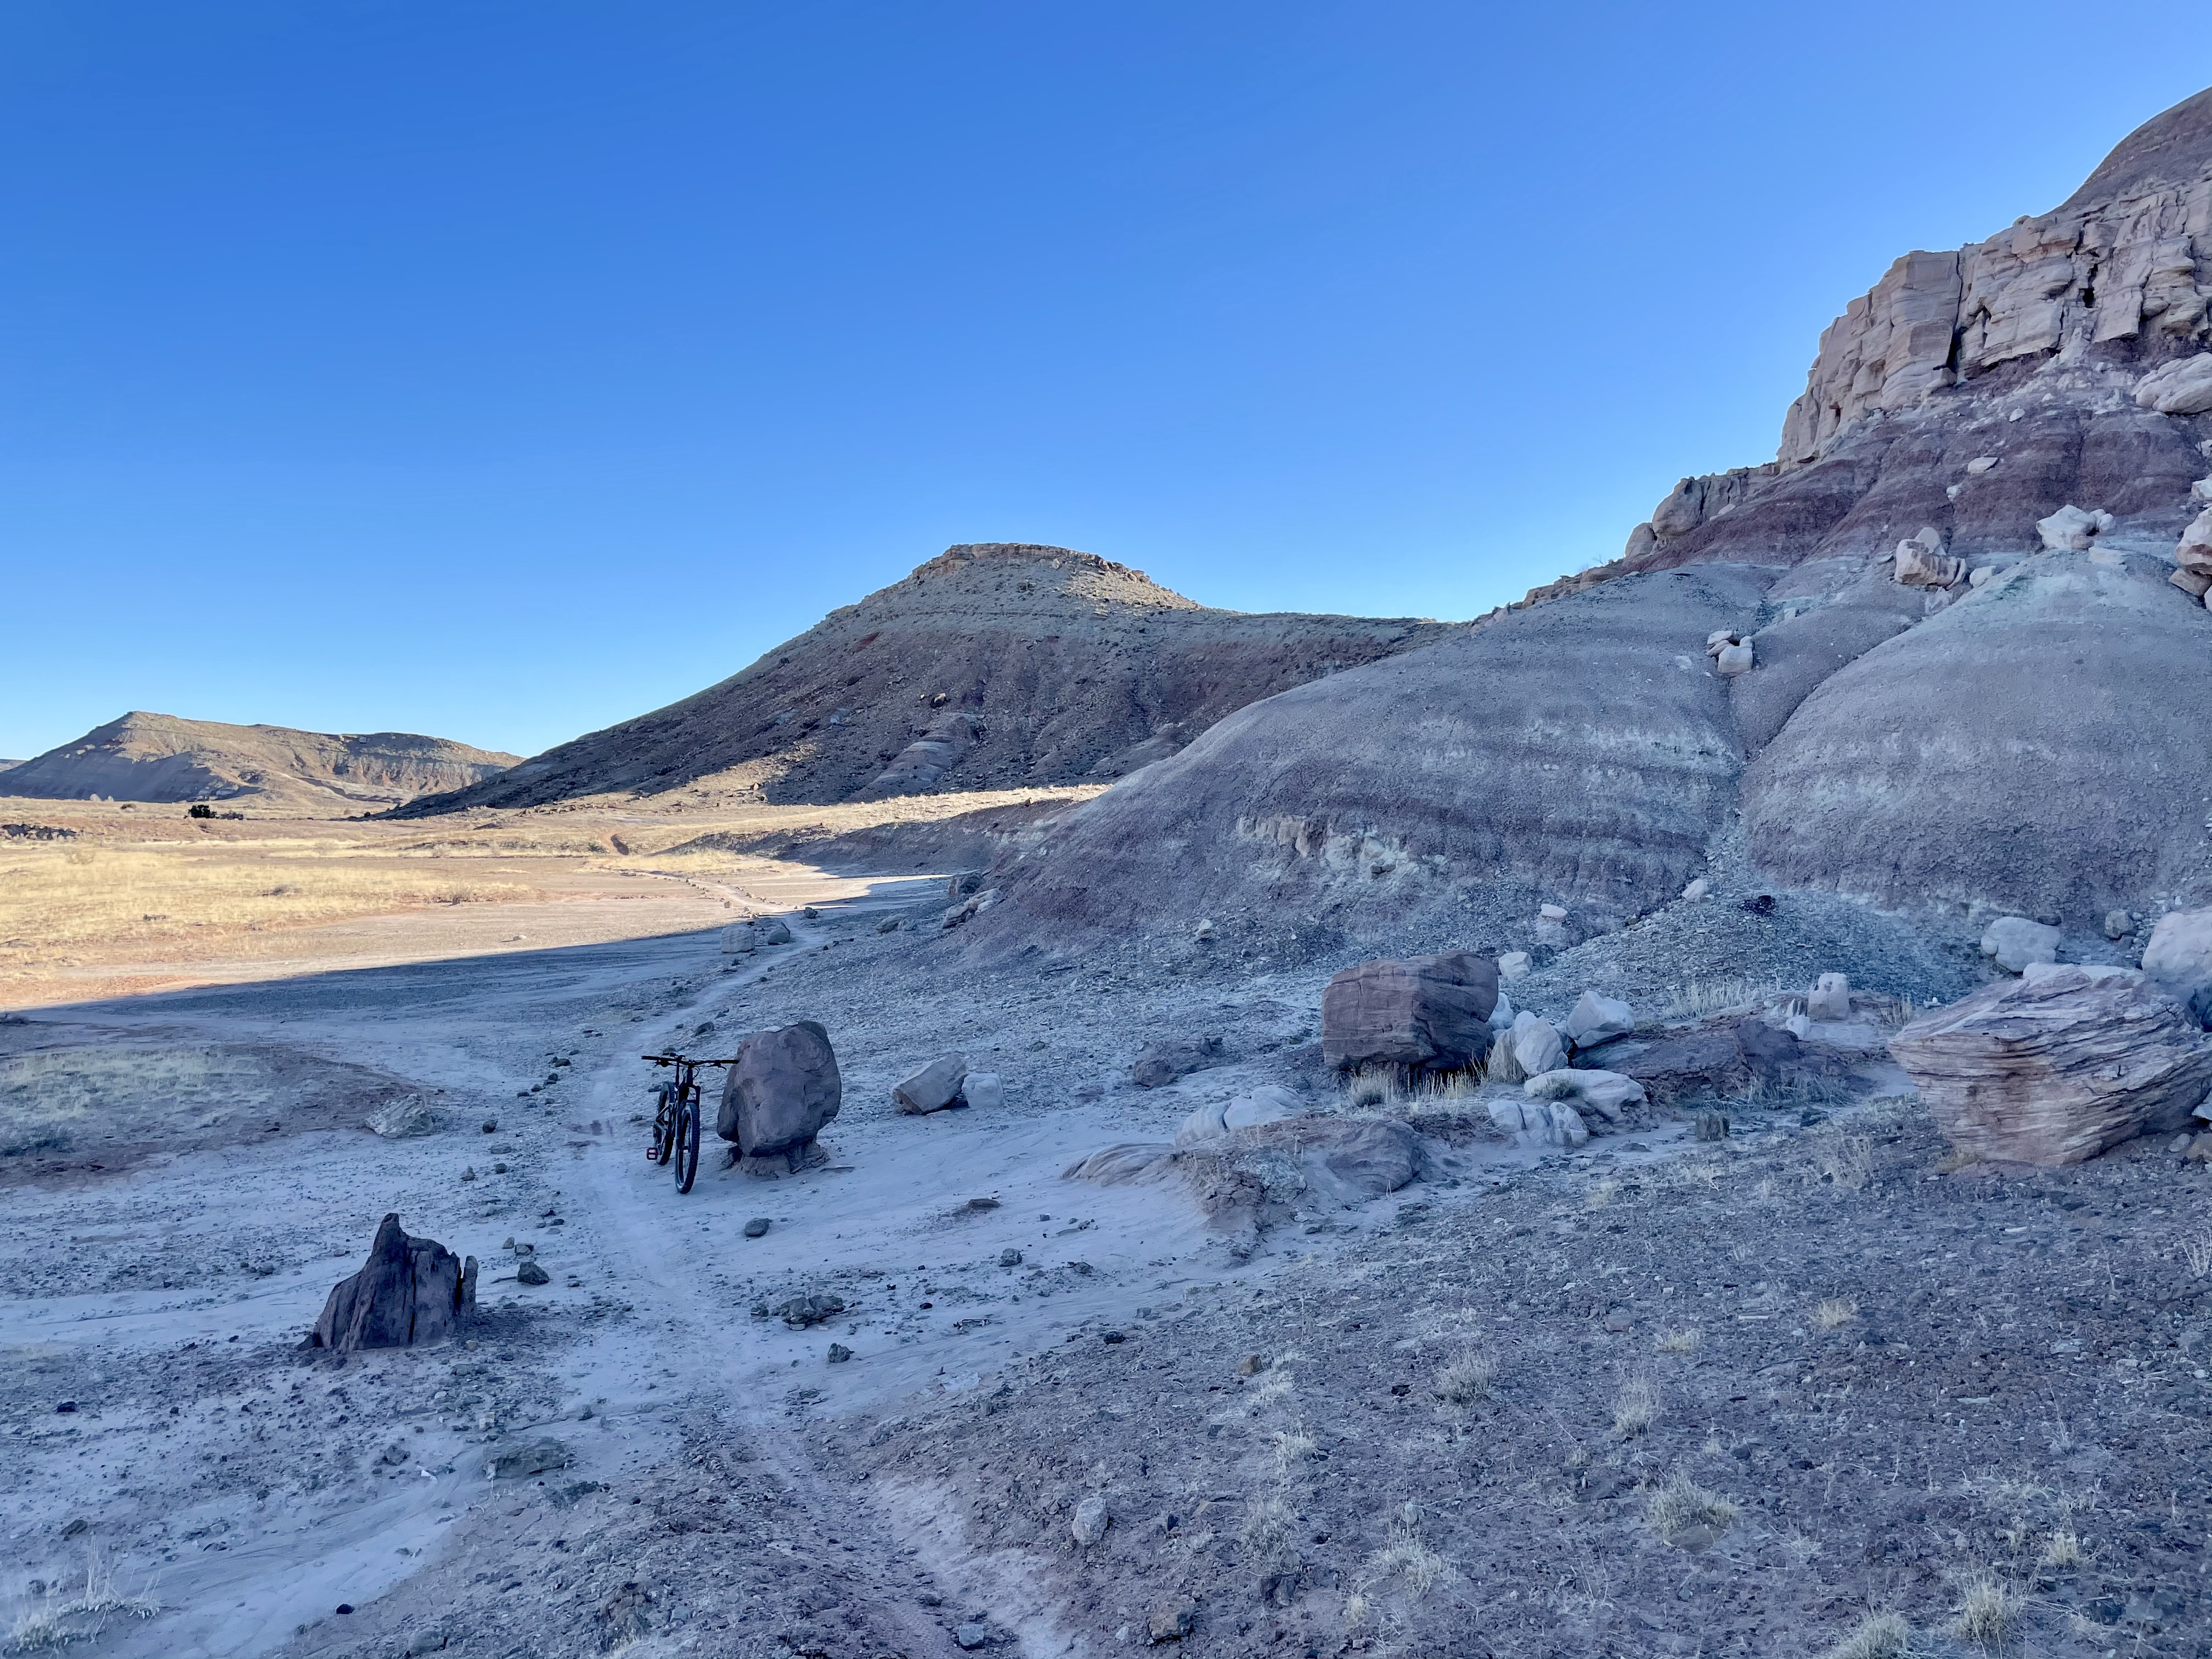 This is the view from Jurassic, the trail that bounds the Klondike Bluffs area from the southwest. It passes the deposits of green rusted rocks and open fields scattered with quartz. 